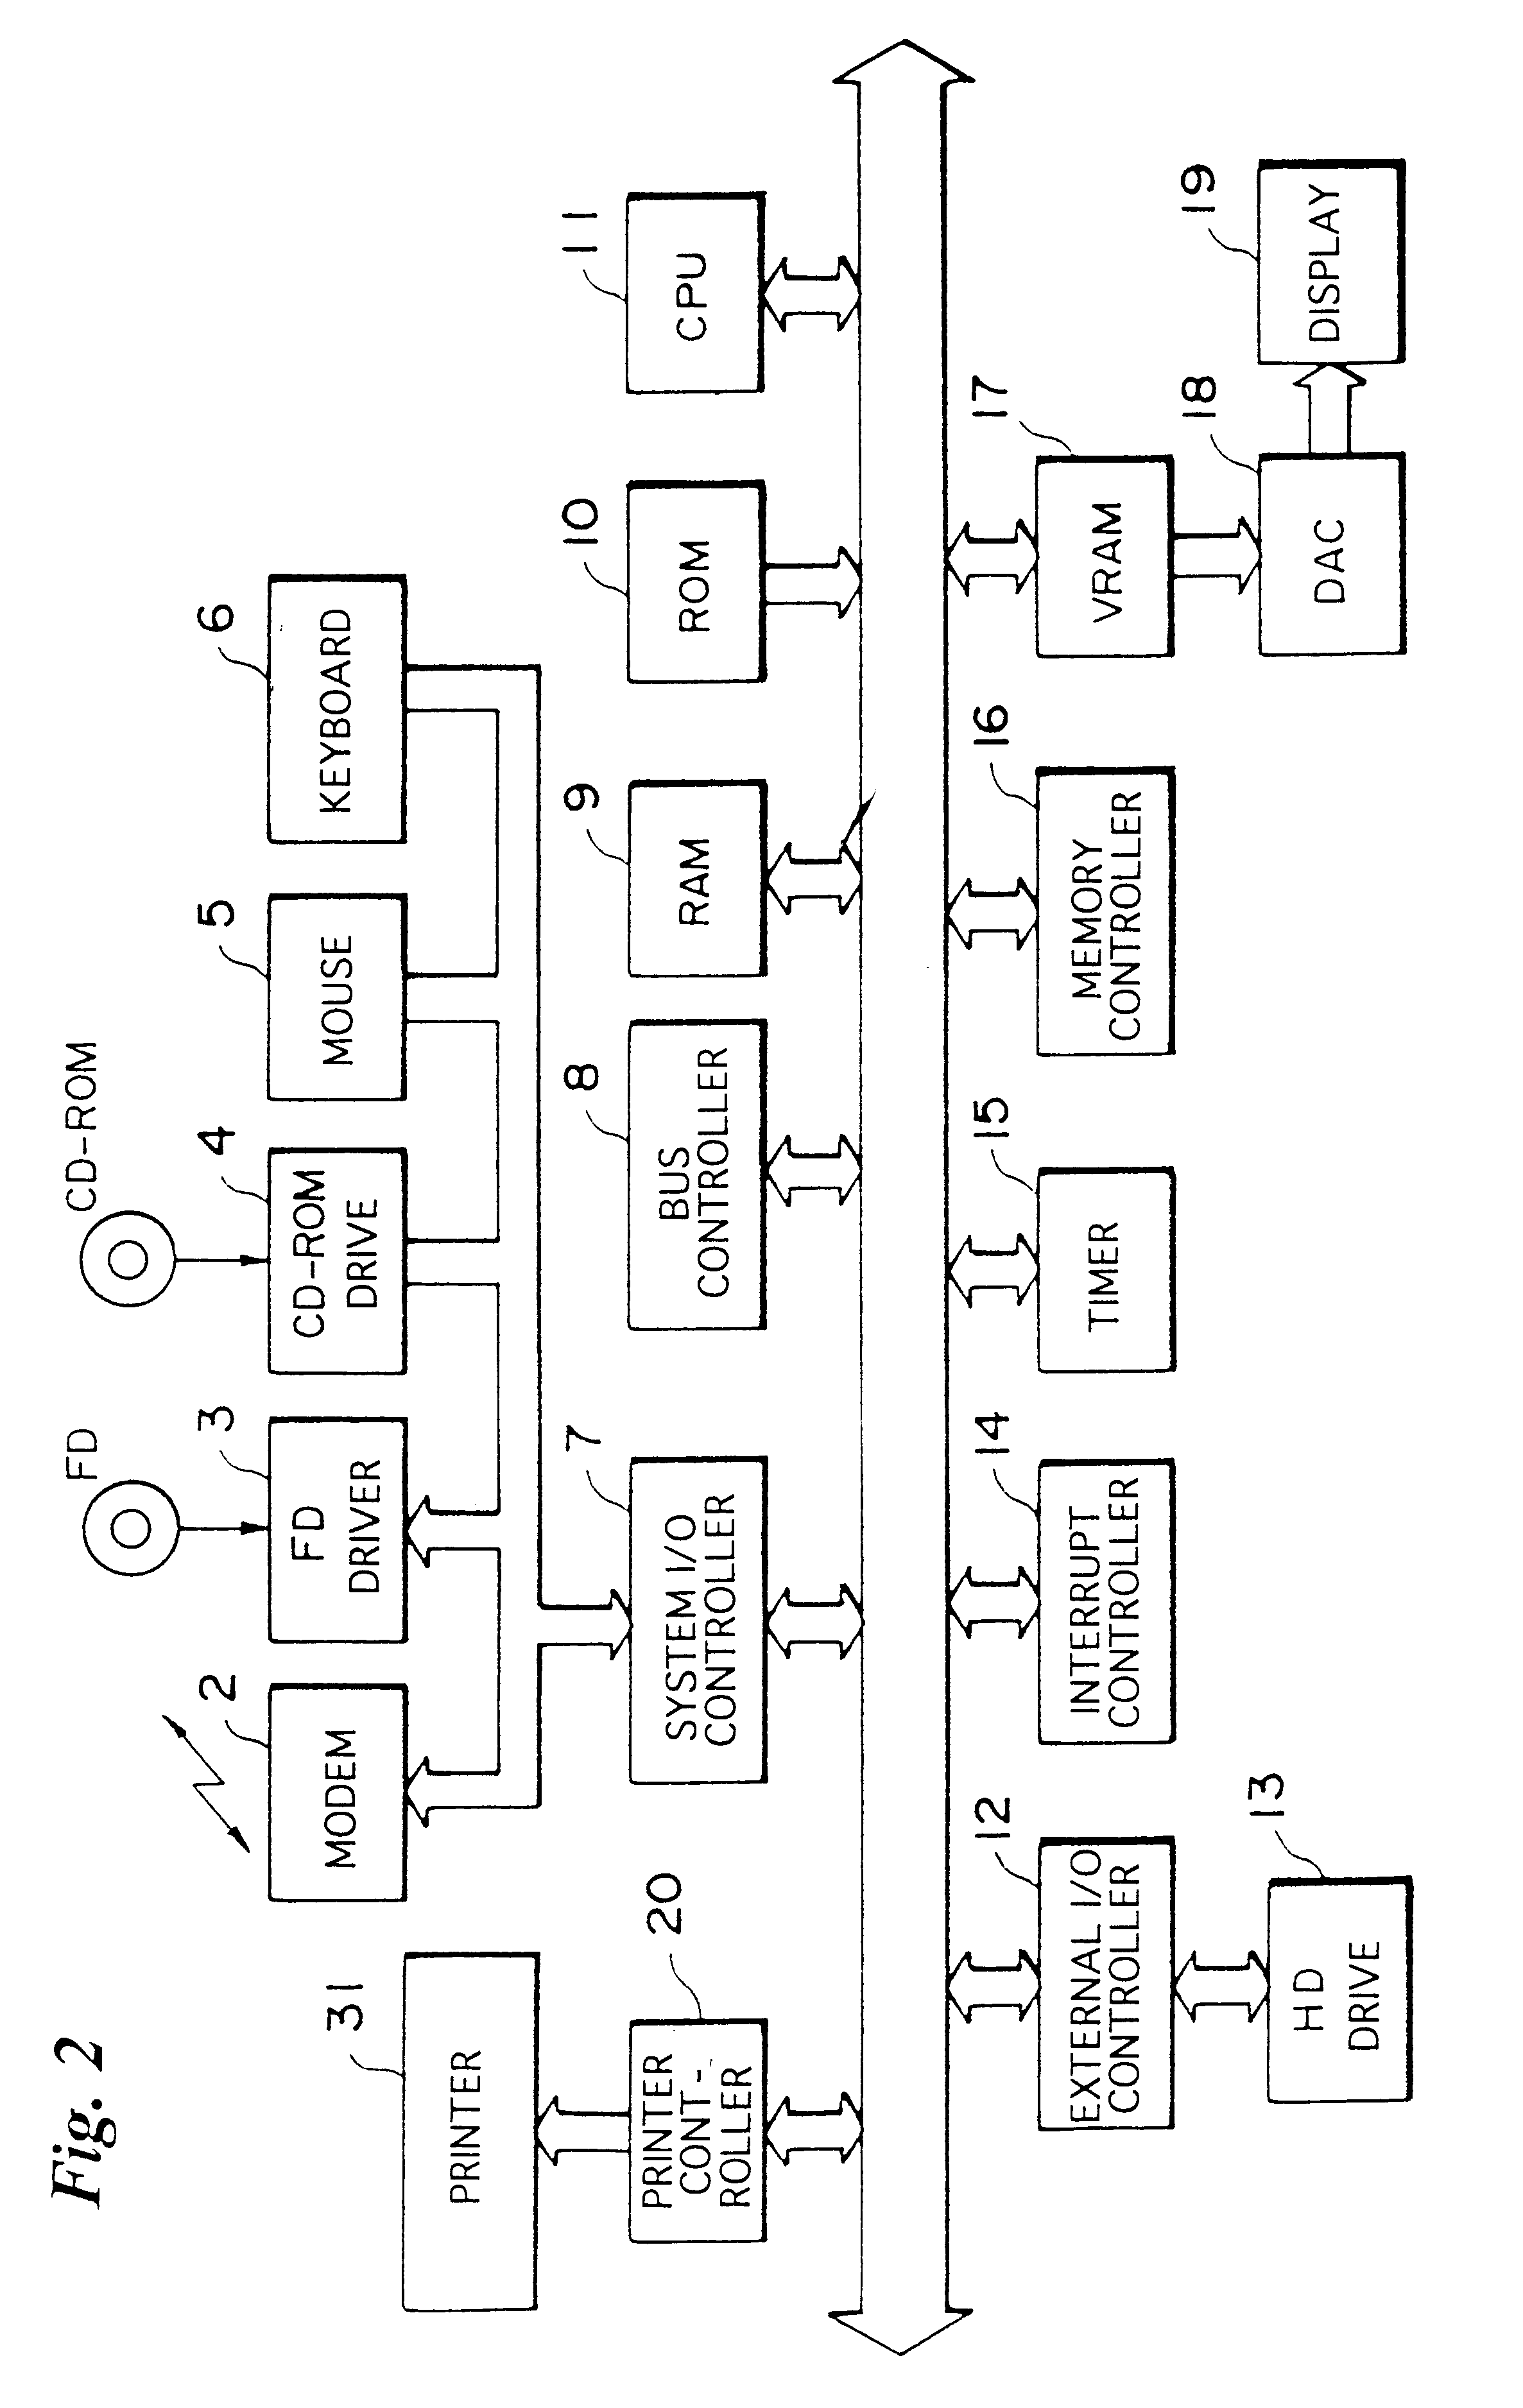 System and method for ordering printing of images, and system and method for printing edited images